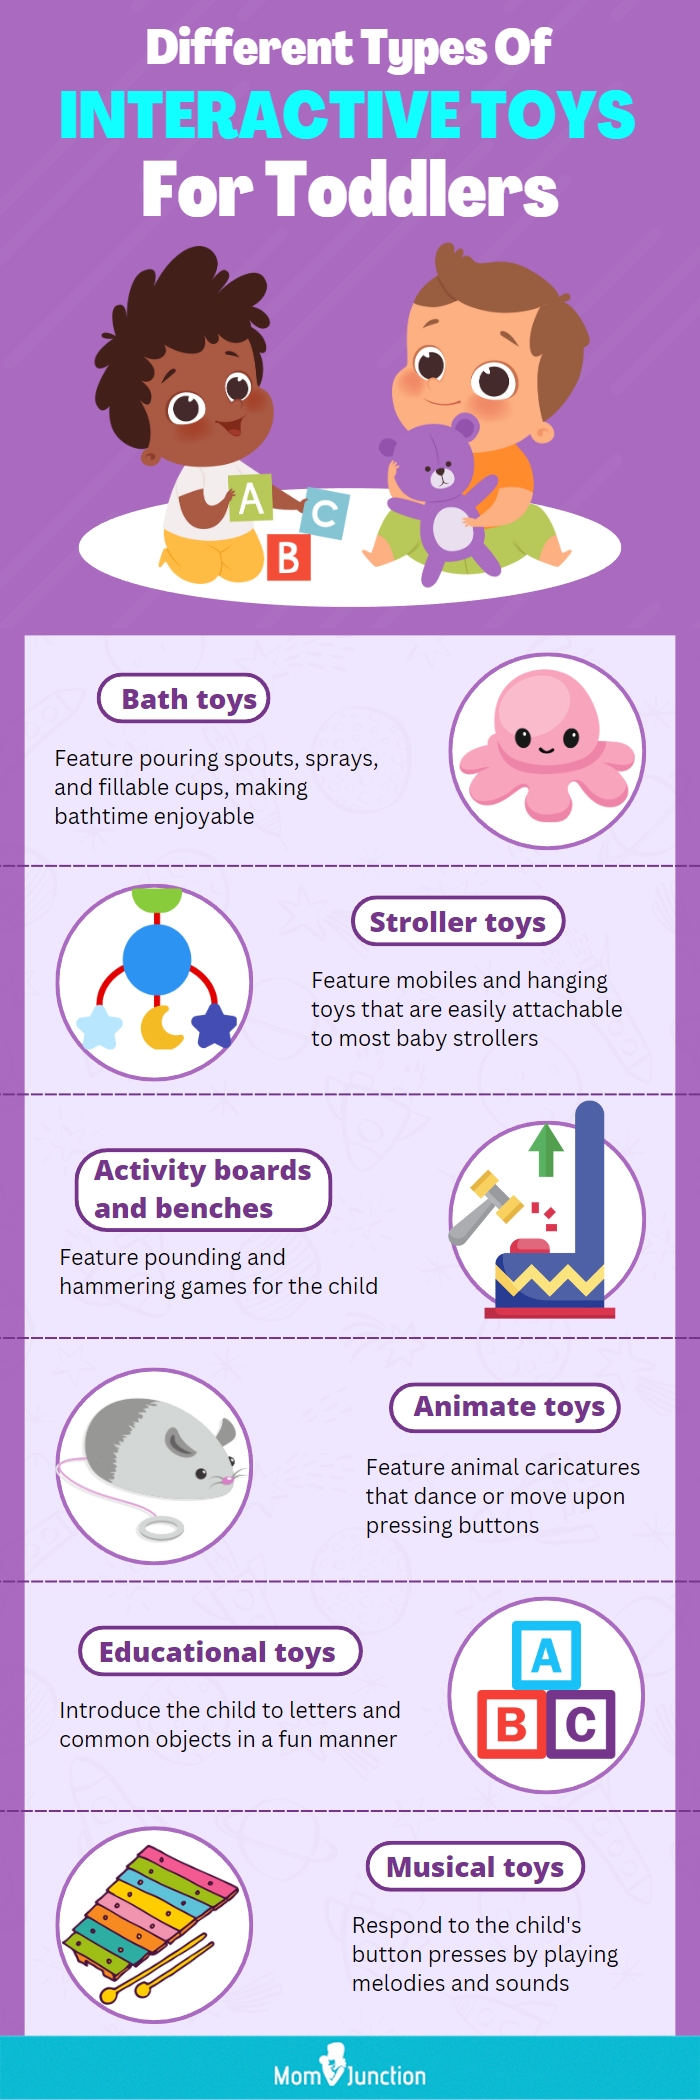 Different Types Of Interactive Toys For Toddlers (infographic)